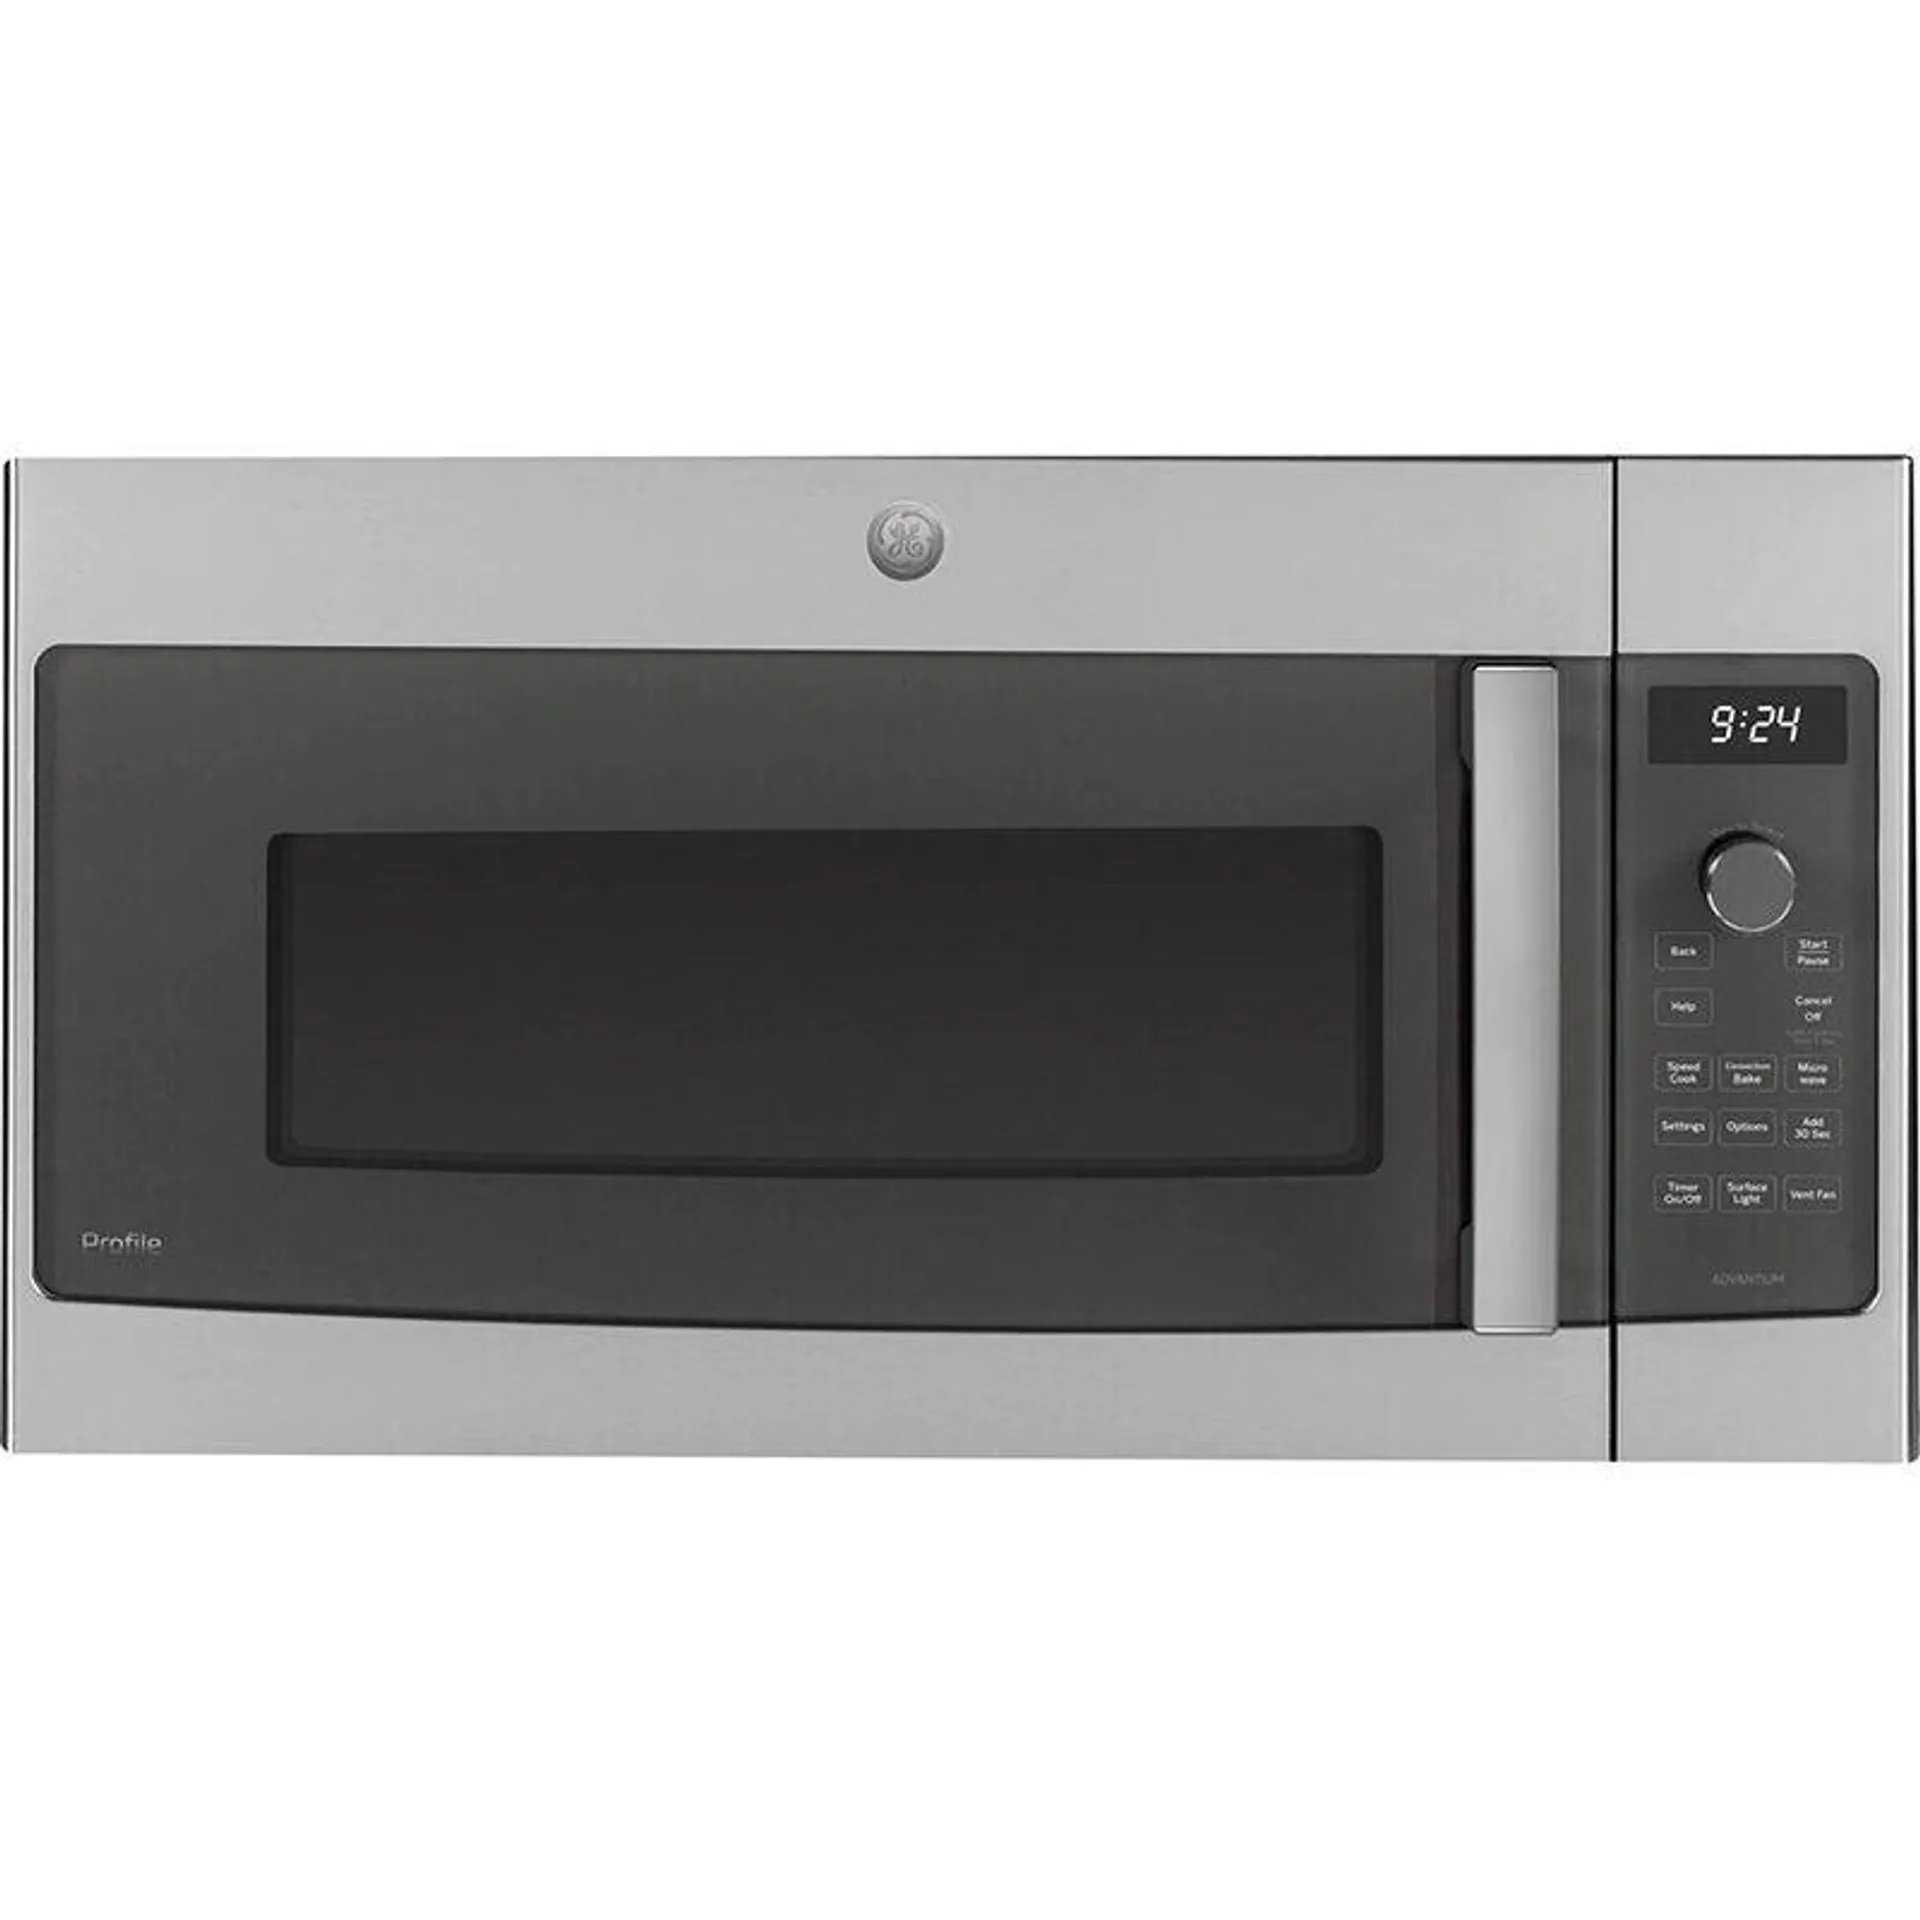 GE Profile 30" 1.7 Cu. Ft. Over-the-Range Microwave with 10 Power Levels, 300 CFM & Sensor Cooking Controls - Stainless Steel